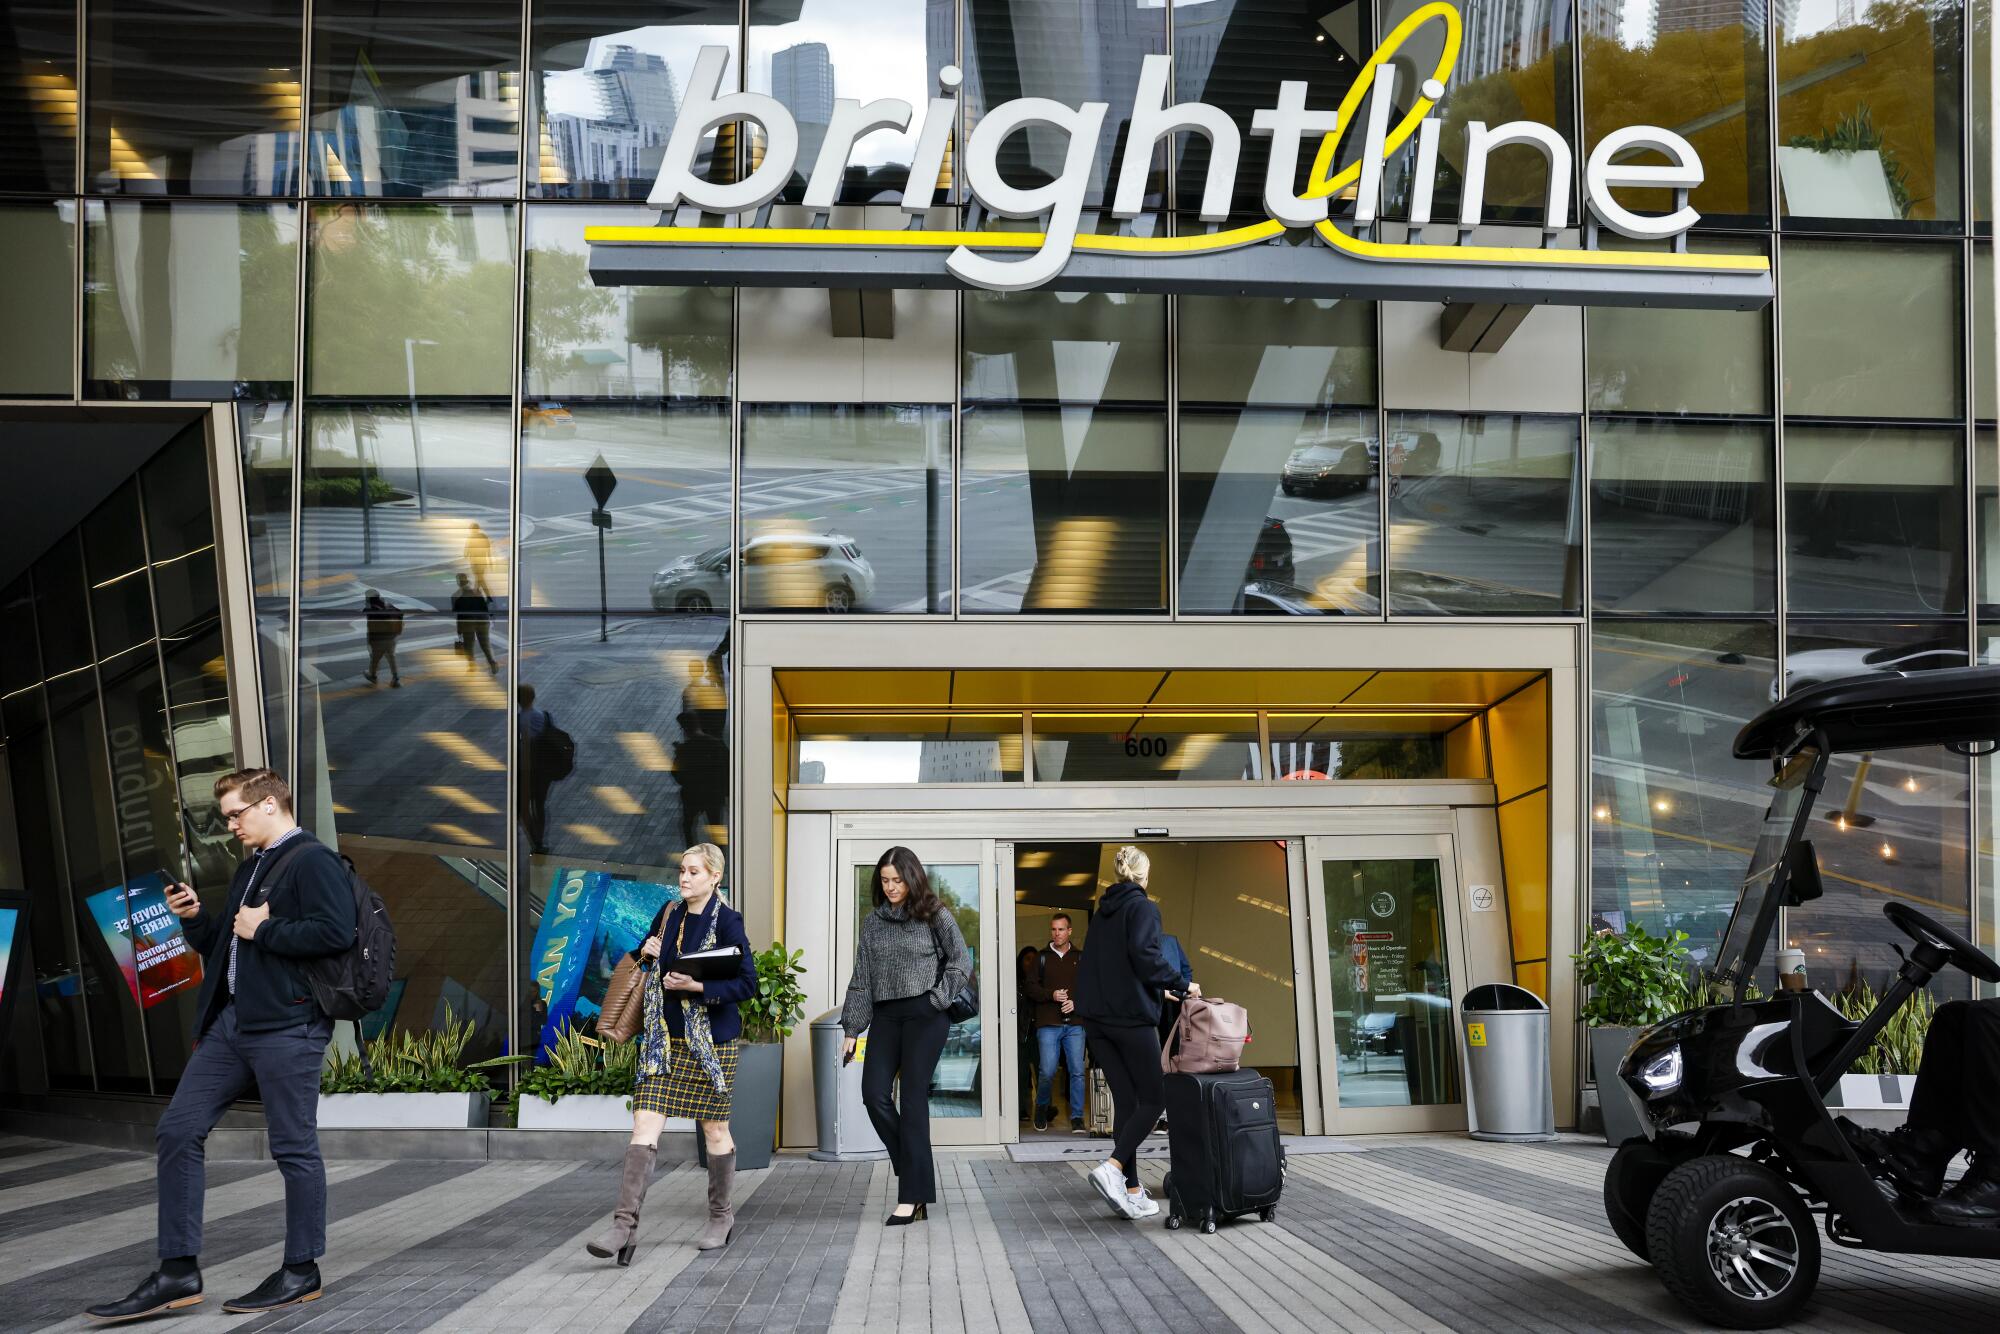 A glass-fronted entrance with the sign "brightline" and people walking outside